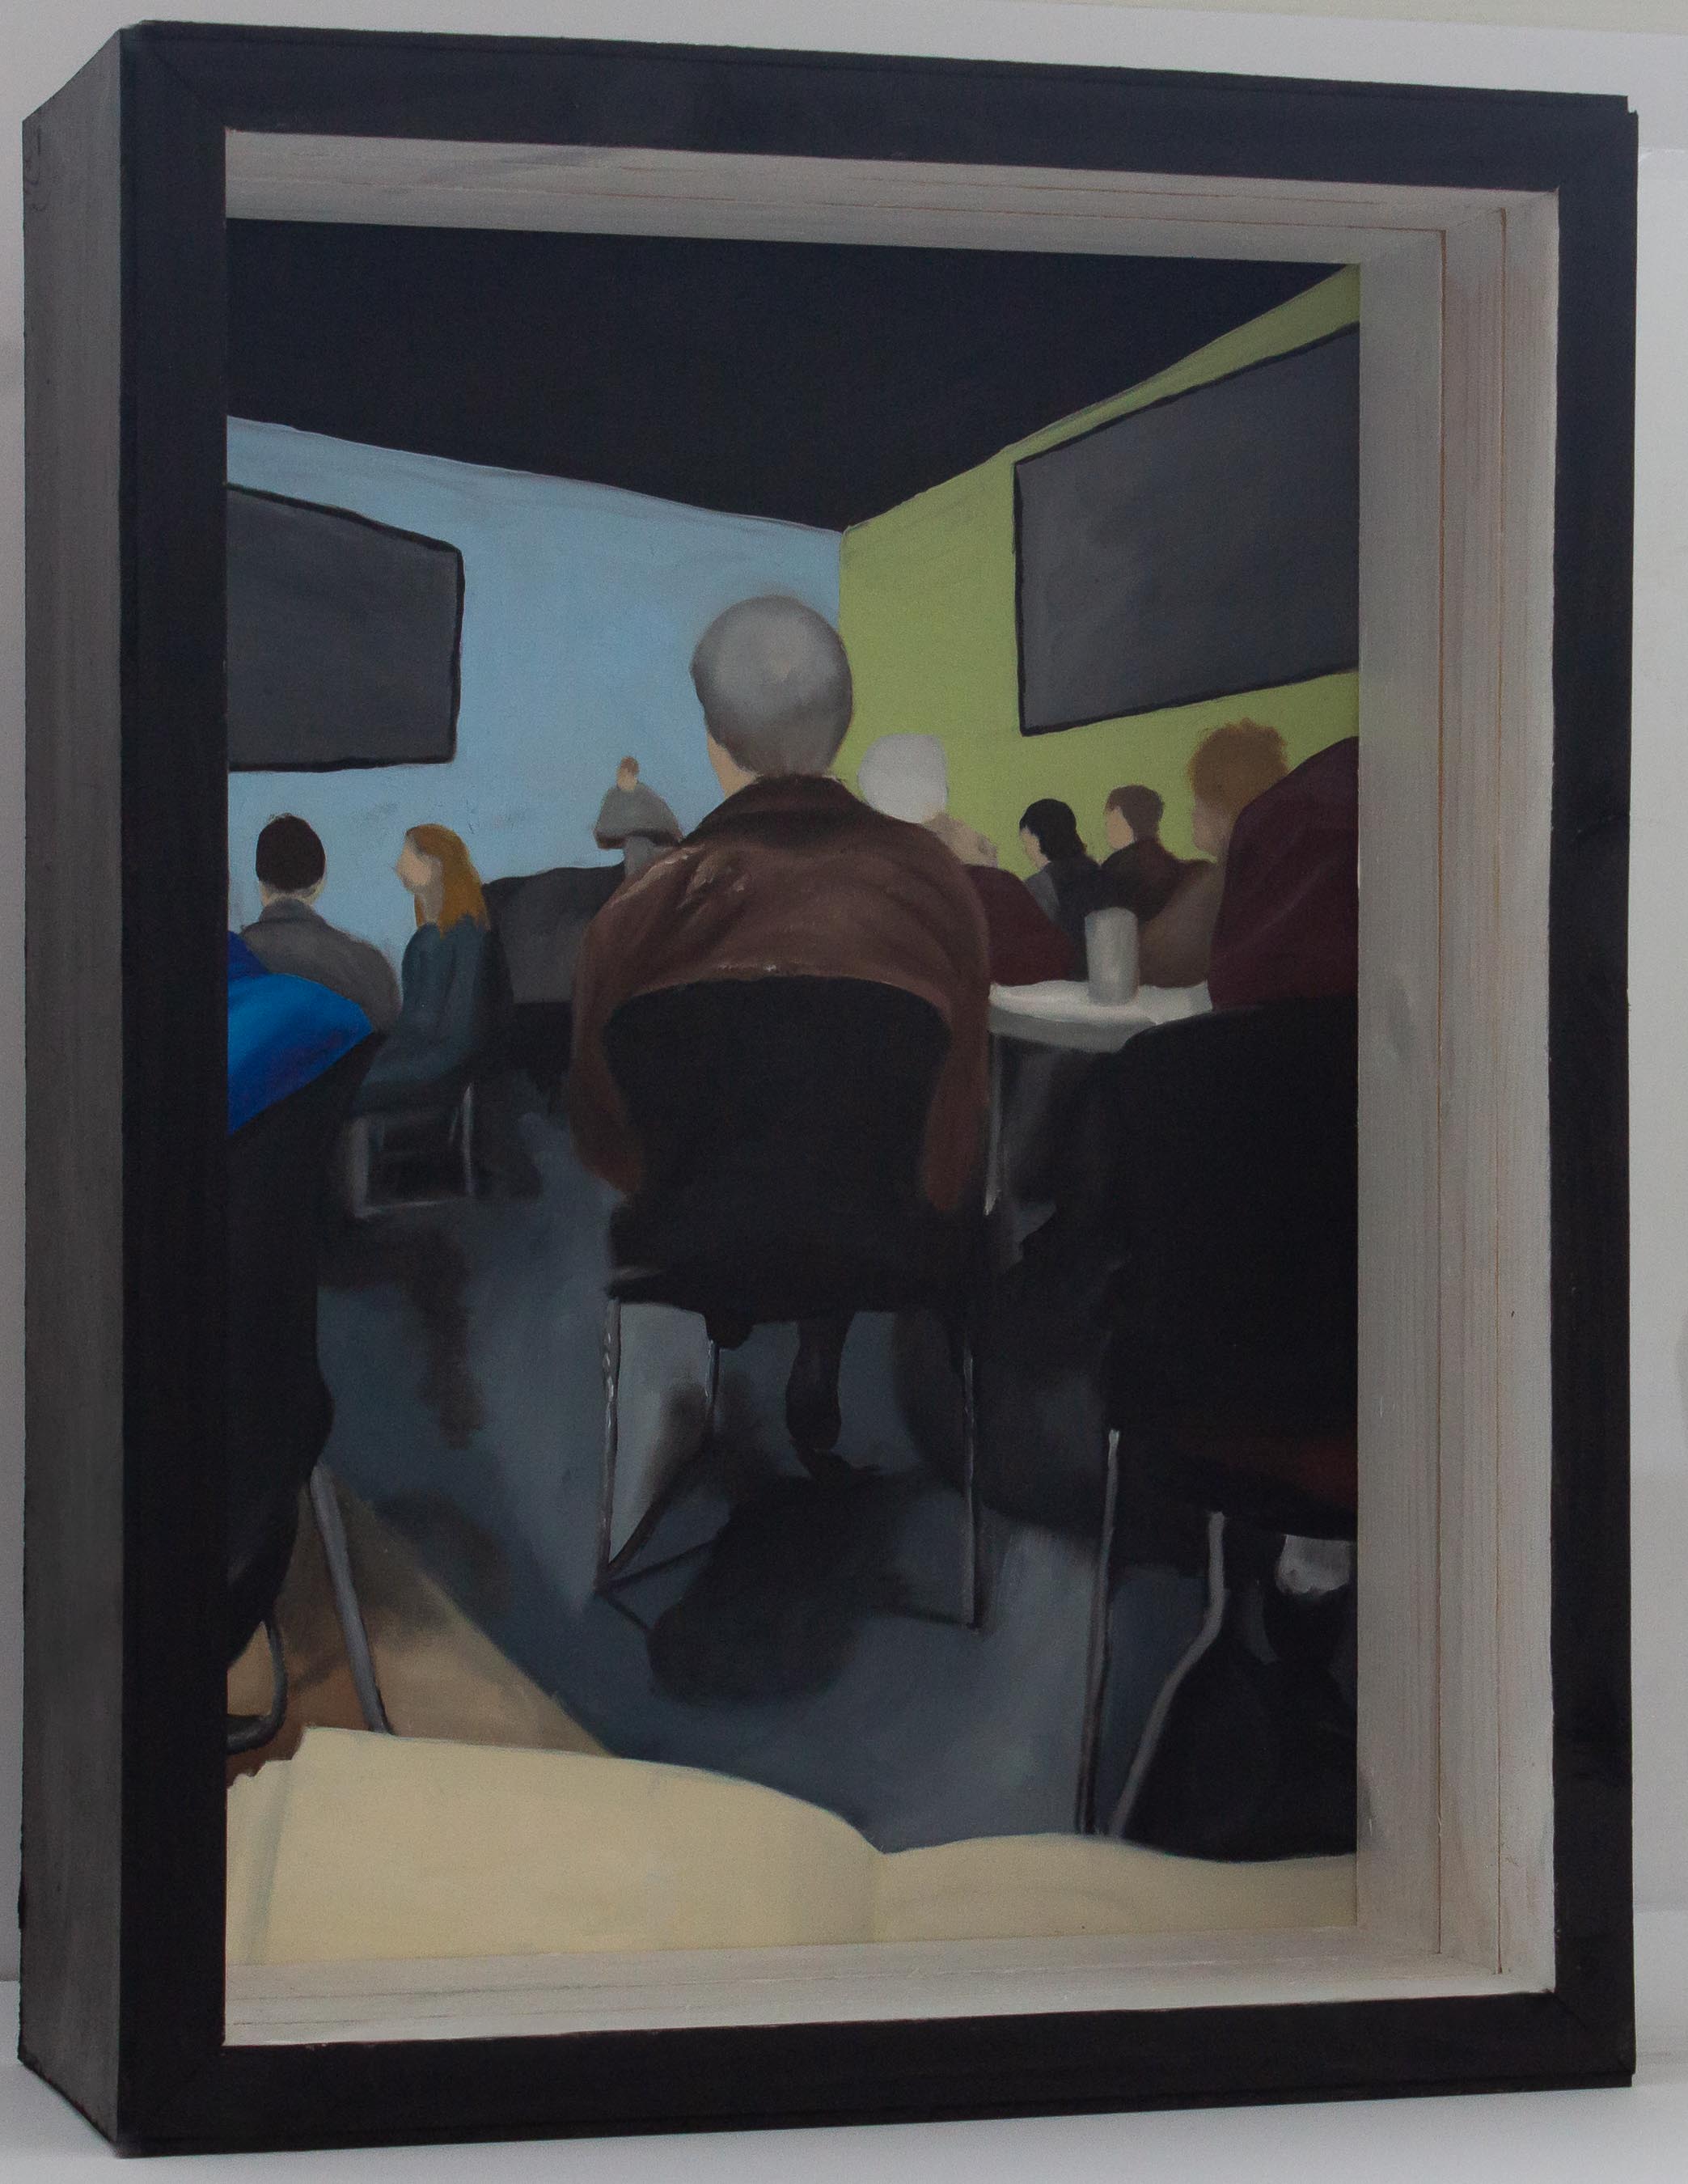 A box with a painting in the back and treated plexiglass panels interfering with the view of the painting. The painting shows a hymnal in the foreground. There are several people sitting in the view of the subject. They are sitting at tables all focused on the preacher who is at the front of the room in the middle of the painting. The walls in the back are painted blue and green and there are screens on both walls. Both panels are slid out of the box. The painting is no longer obstructed by the plexiglass. There is a man sitting directly in front of the view of the subject, he is wearing a brown jacket and his hair is grey. There is a man to the left in a bright blue shirt with brown hair. There are several people further forward. The preacher is at a podium. 